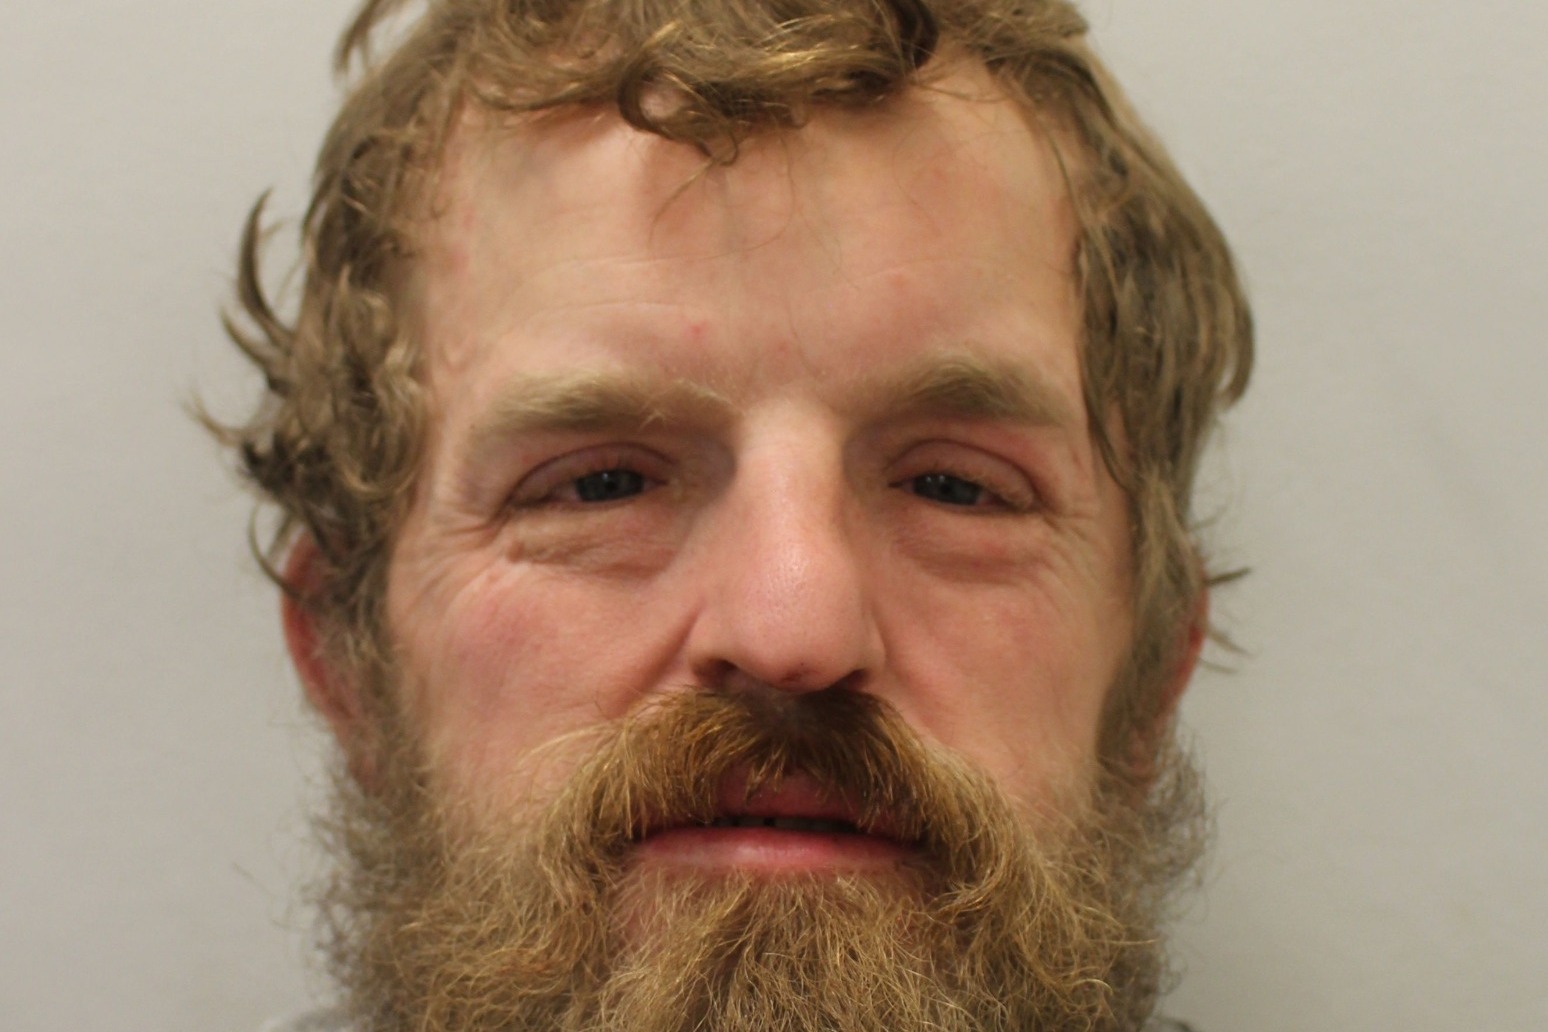 Man jailed after stealing PPE from ambulance 